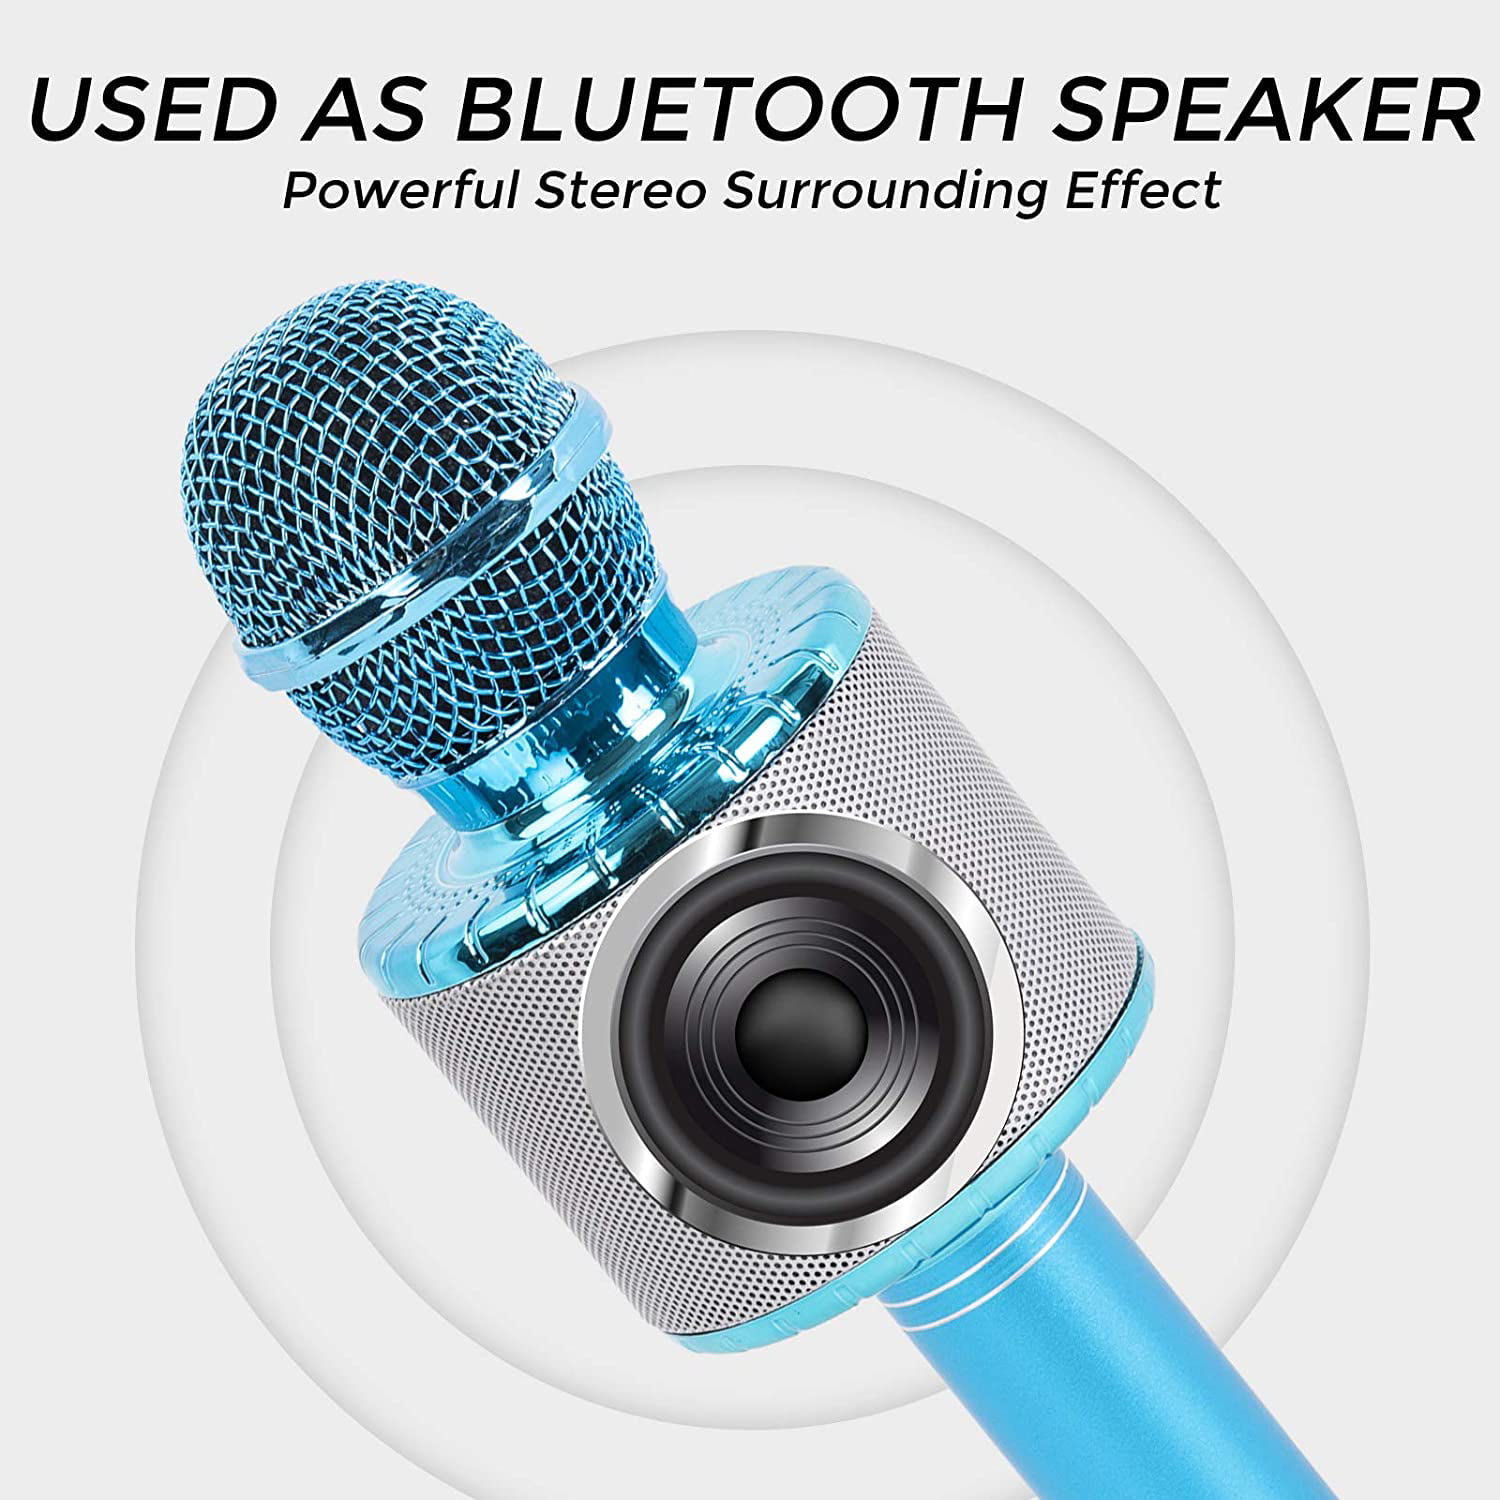 Wireless Portable Handheld Bluetooth Microphone with LED Lights Blue Best Gifts JMFinger Karaoke Microphone for Kids and Adults 